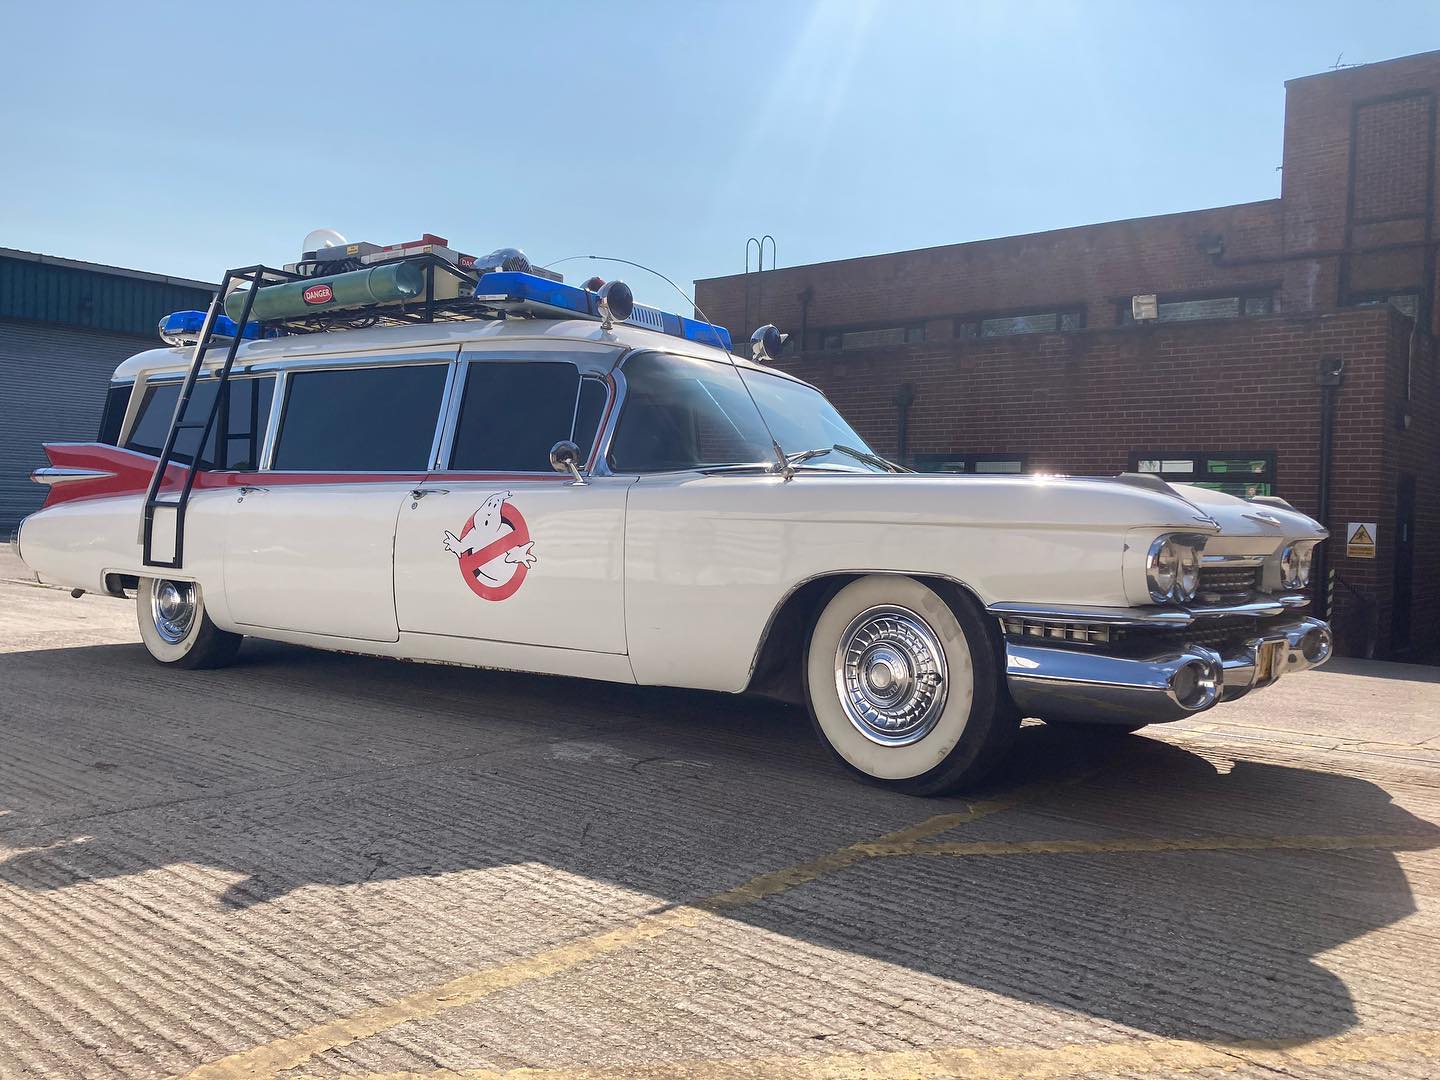 Ghostbusters cars